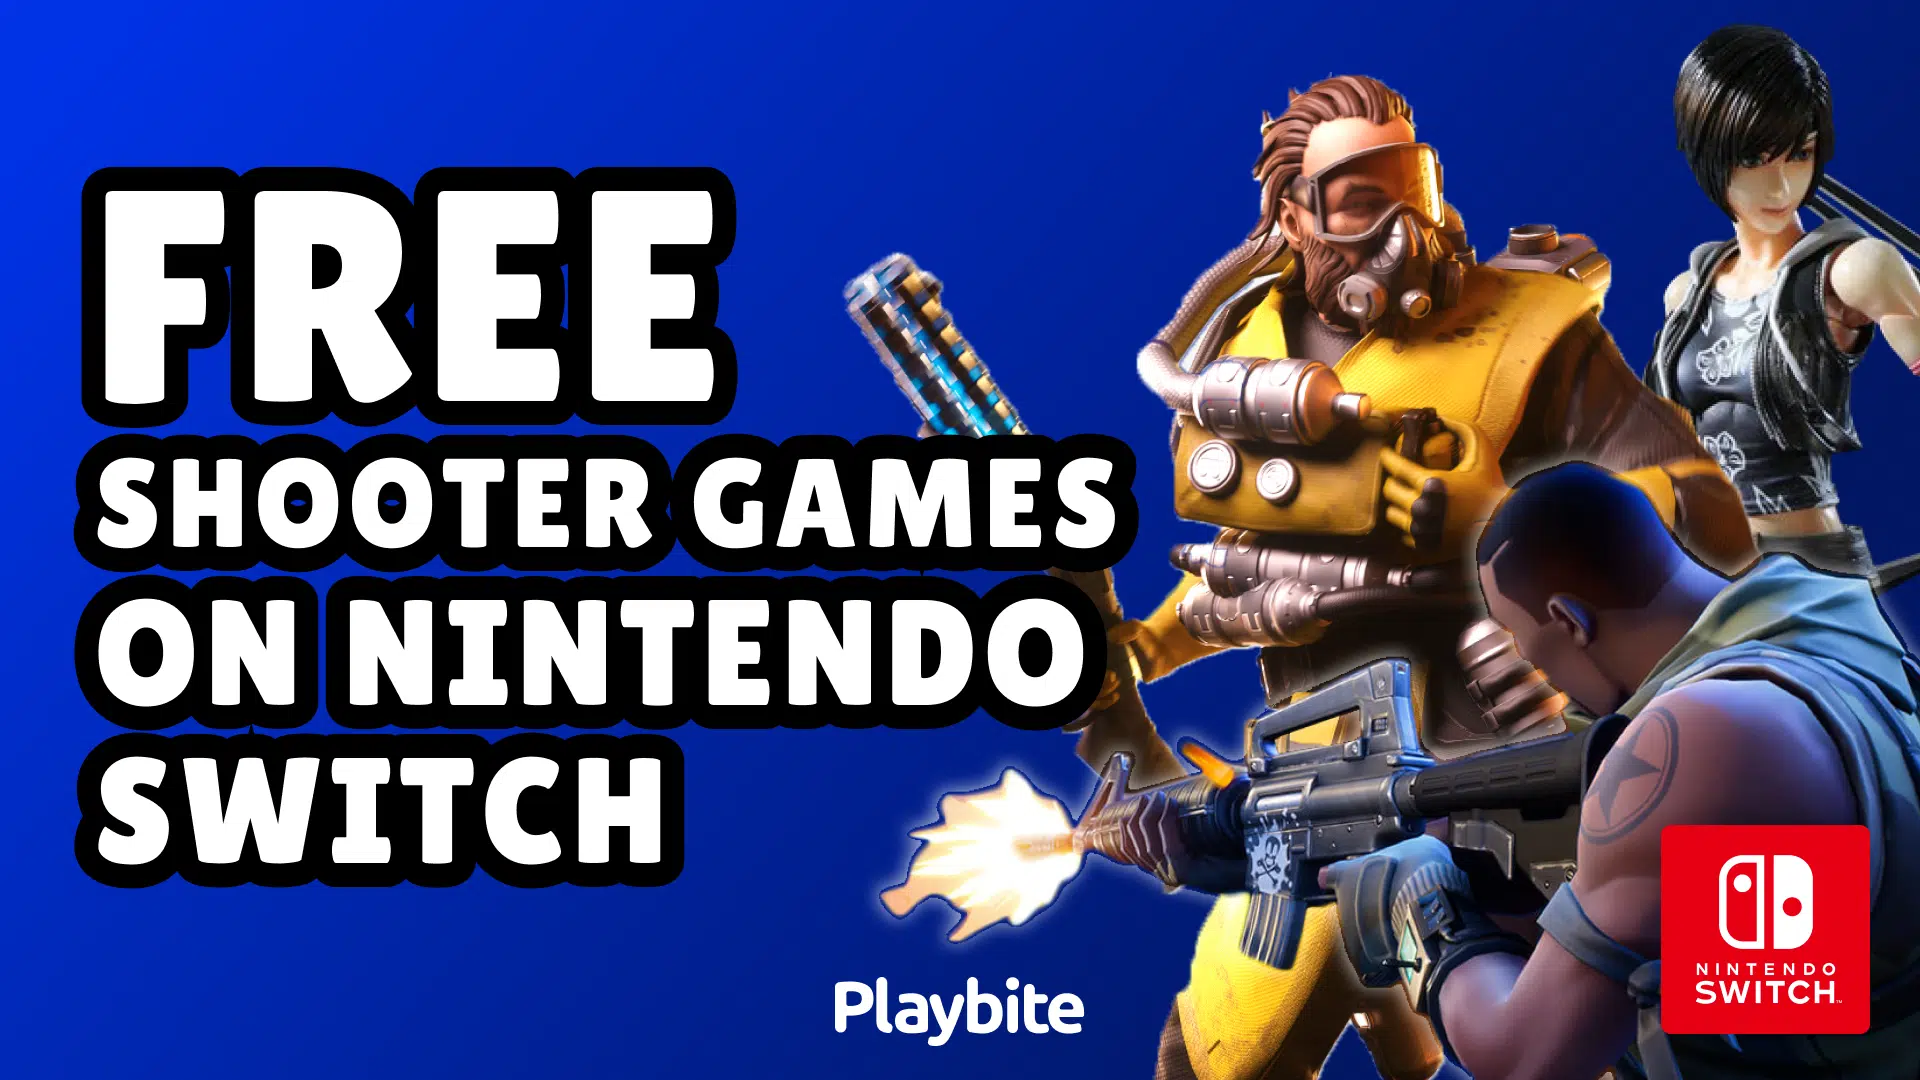 Free Shooter Games on Nintendo Switch